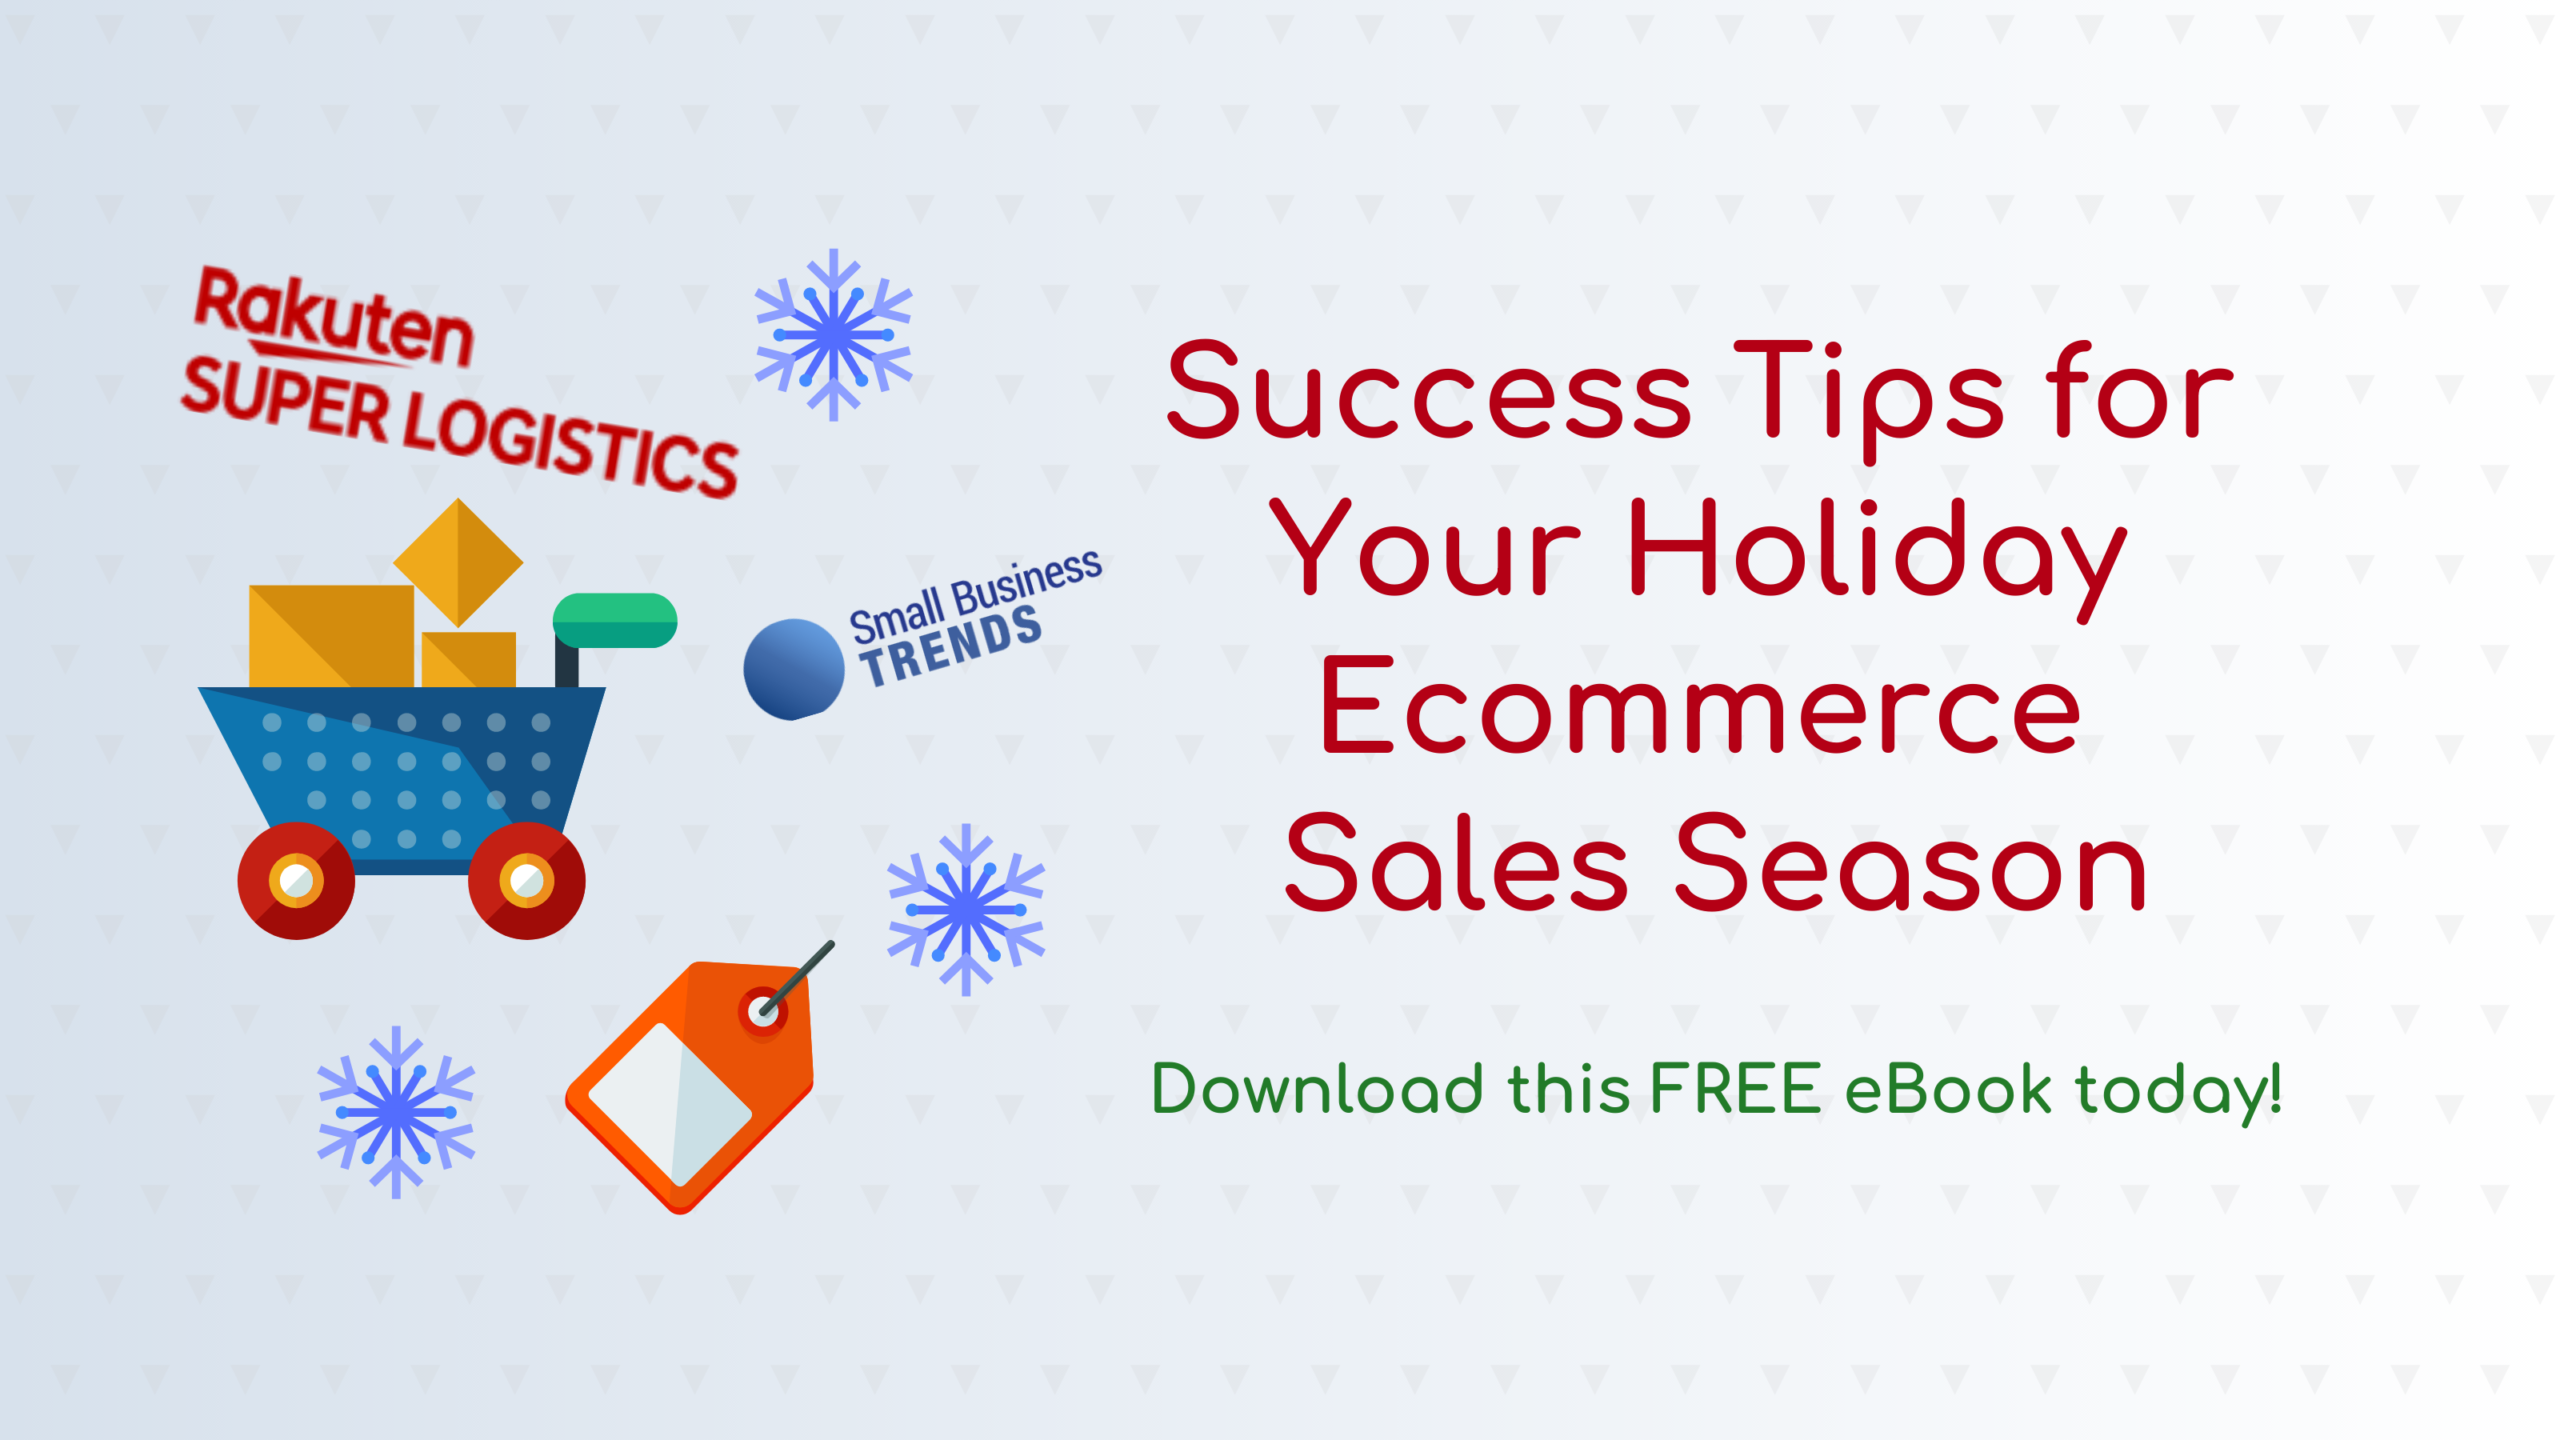 ecommerce business sales tips ebook